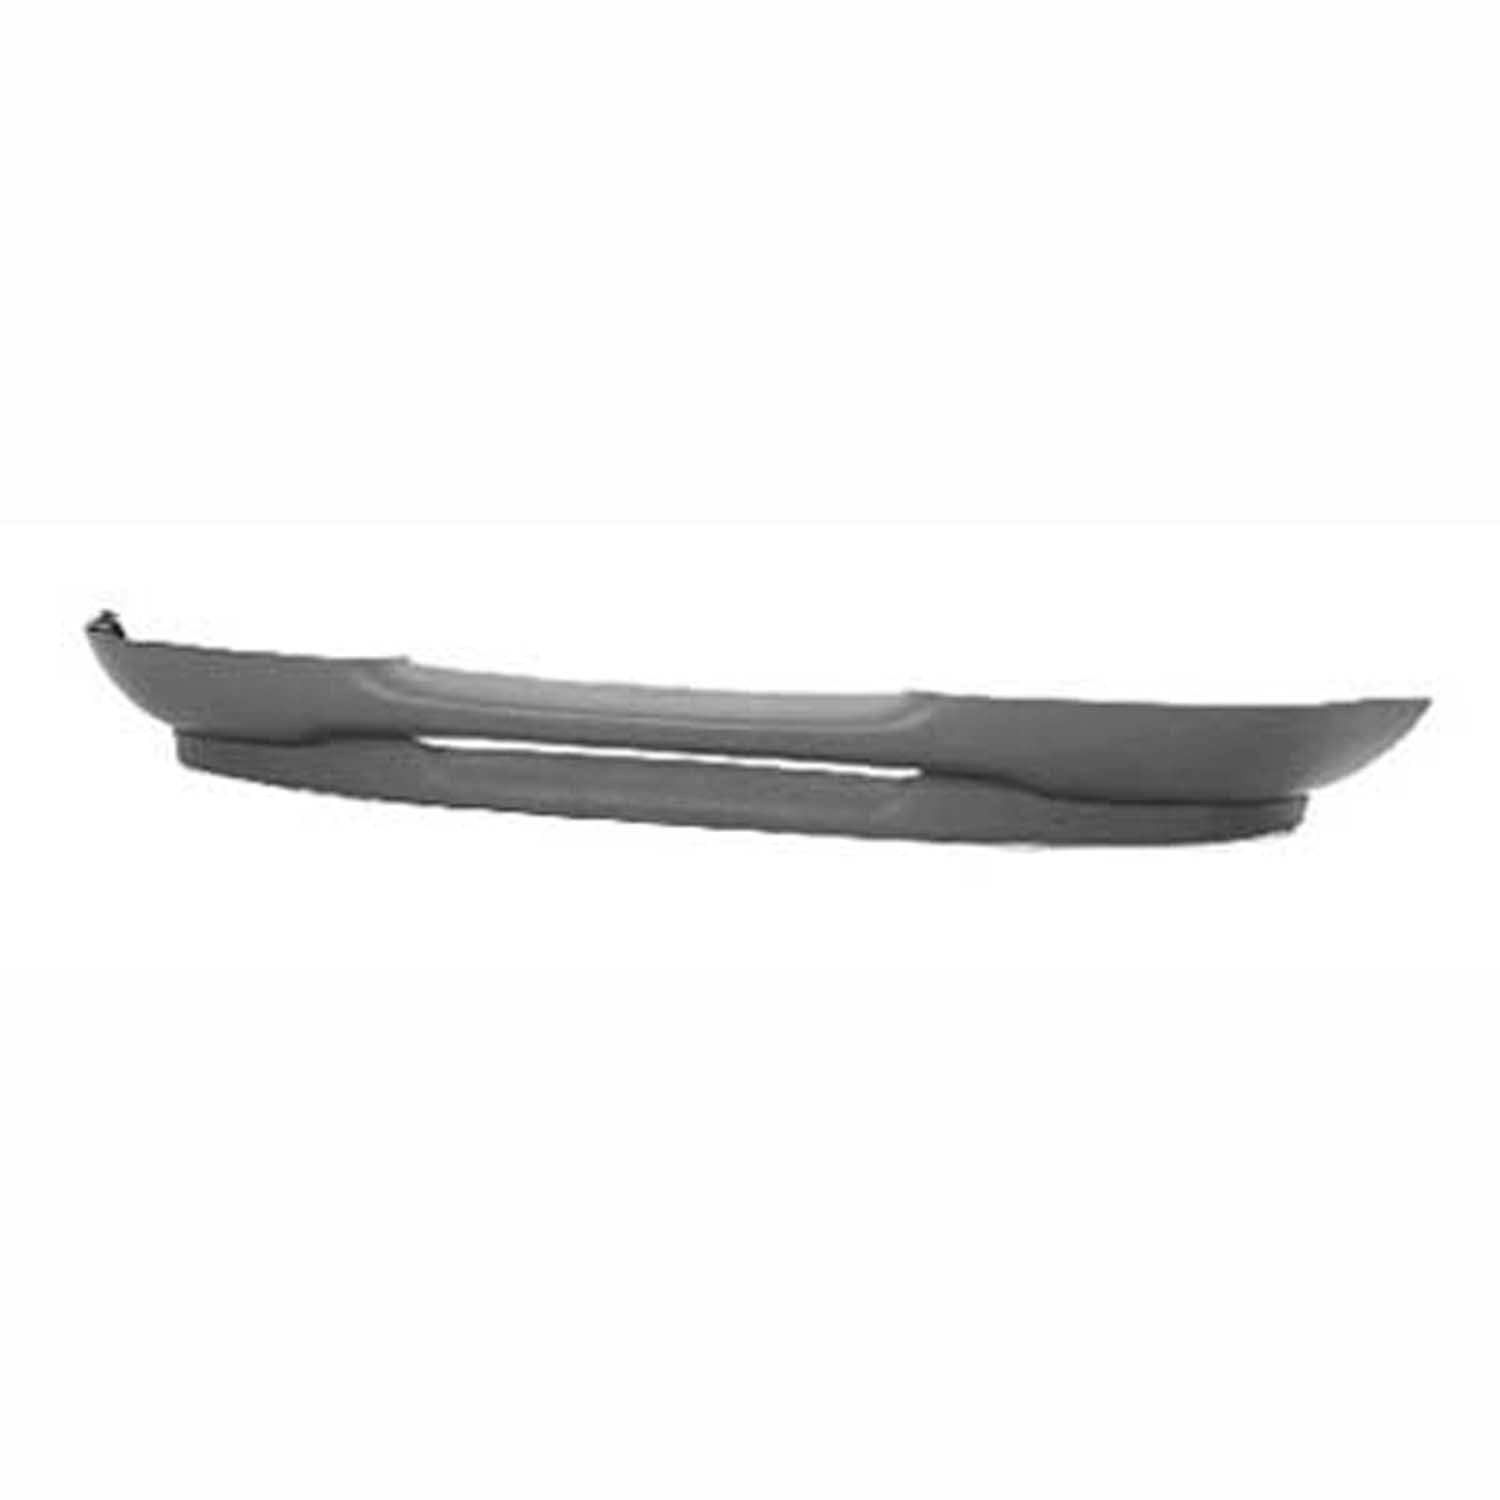 KAI New Standard Replacement Front Lower Valance Panel, Fits 1998